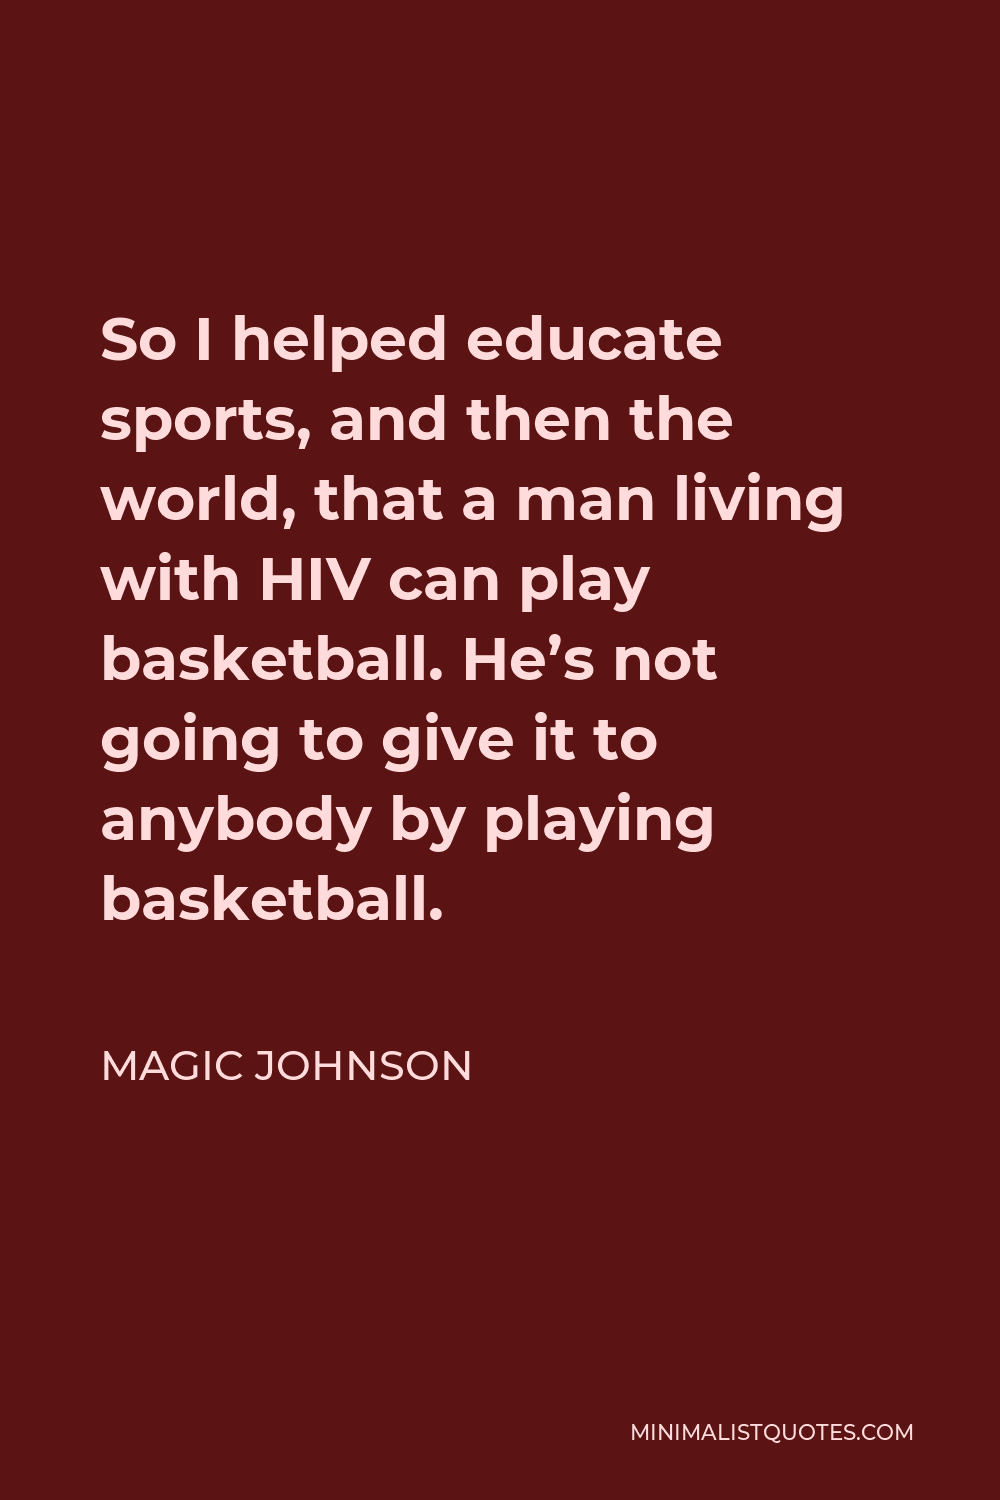 Magic Johnson Quote - So I helped educate sports, and then the world, that a man living with HIV can play basketball. He’s not going to give it to anybody by playing basketball.